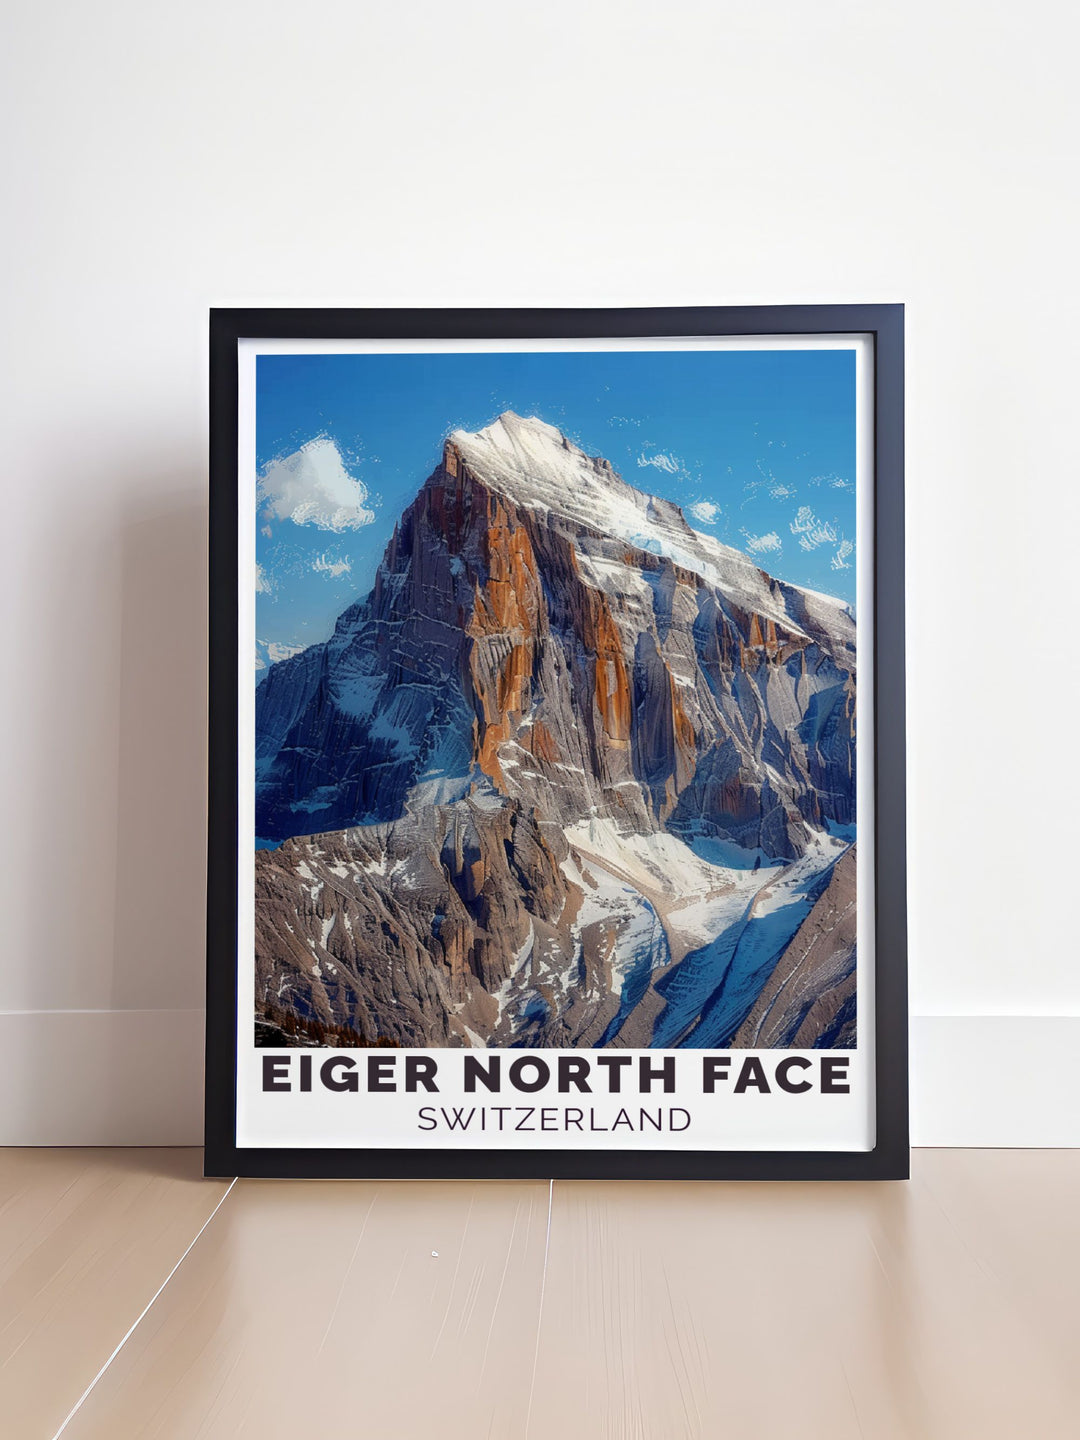 Captivating retro travel poster featuring the Eiger and the charming Grindelwald village perfect for those who appreciate classic aesthetics and wish to add a timeless piece of Swiss Alps beauty to their living spaces.